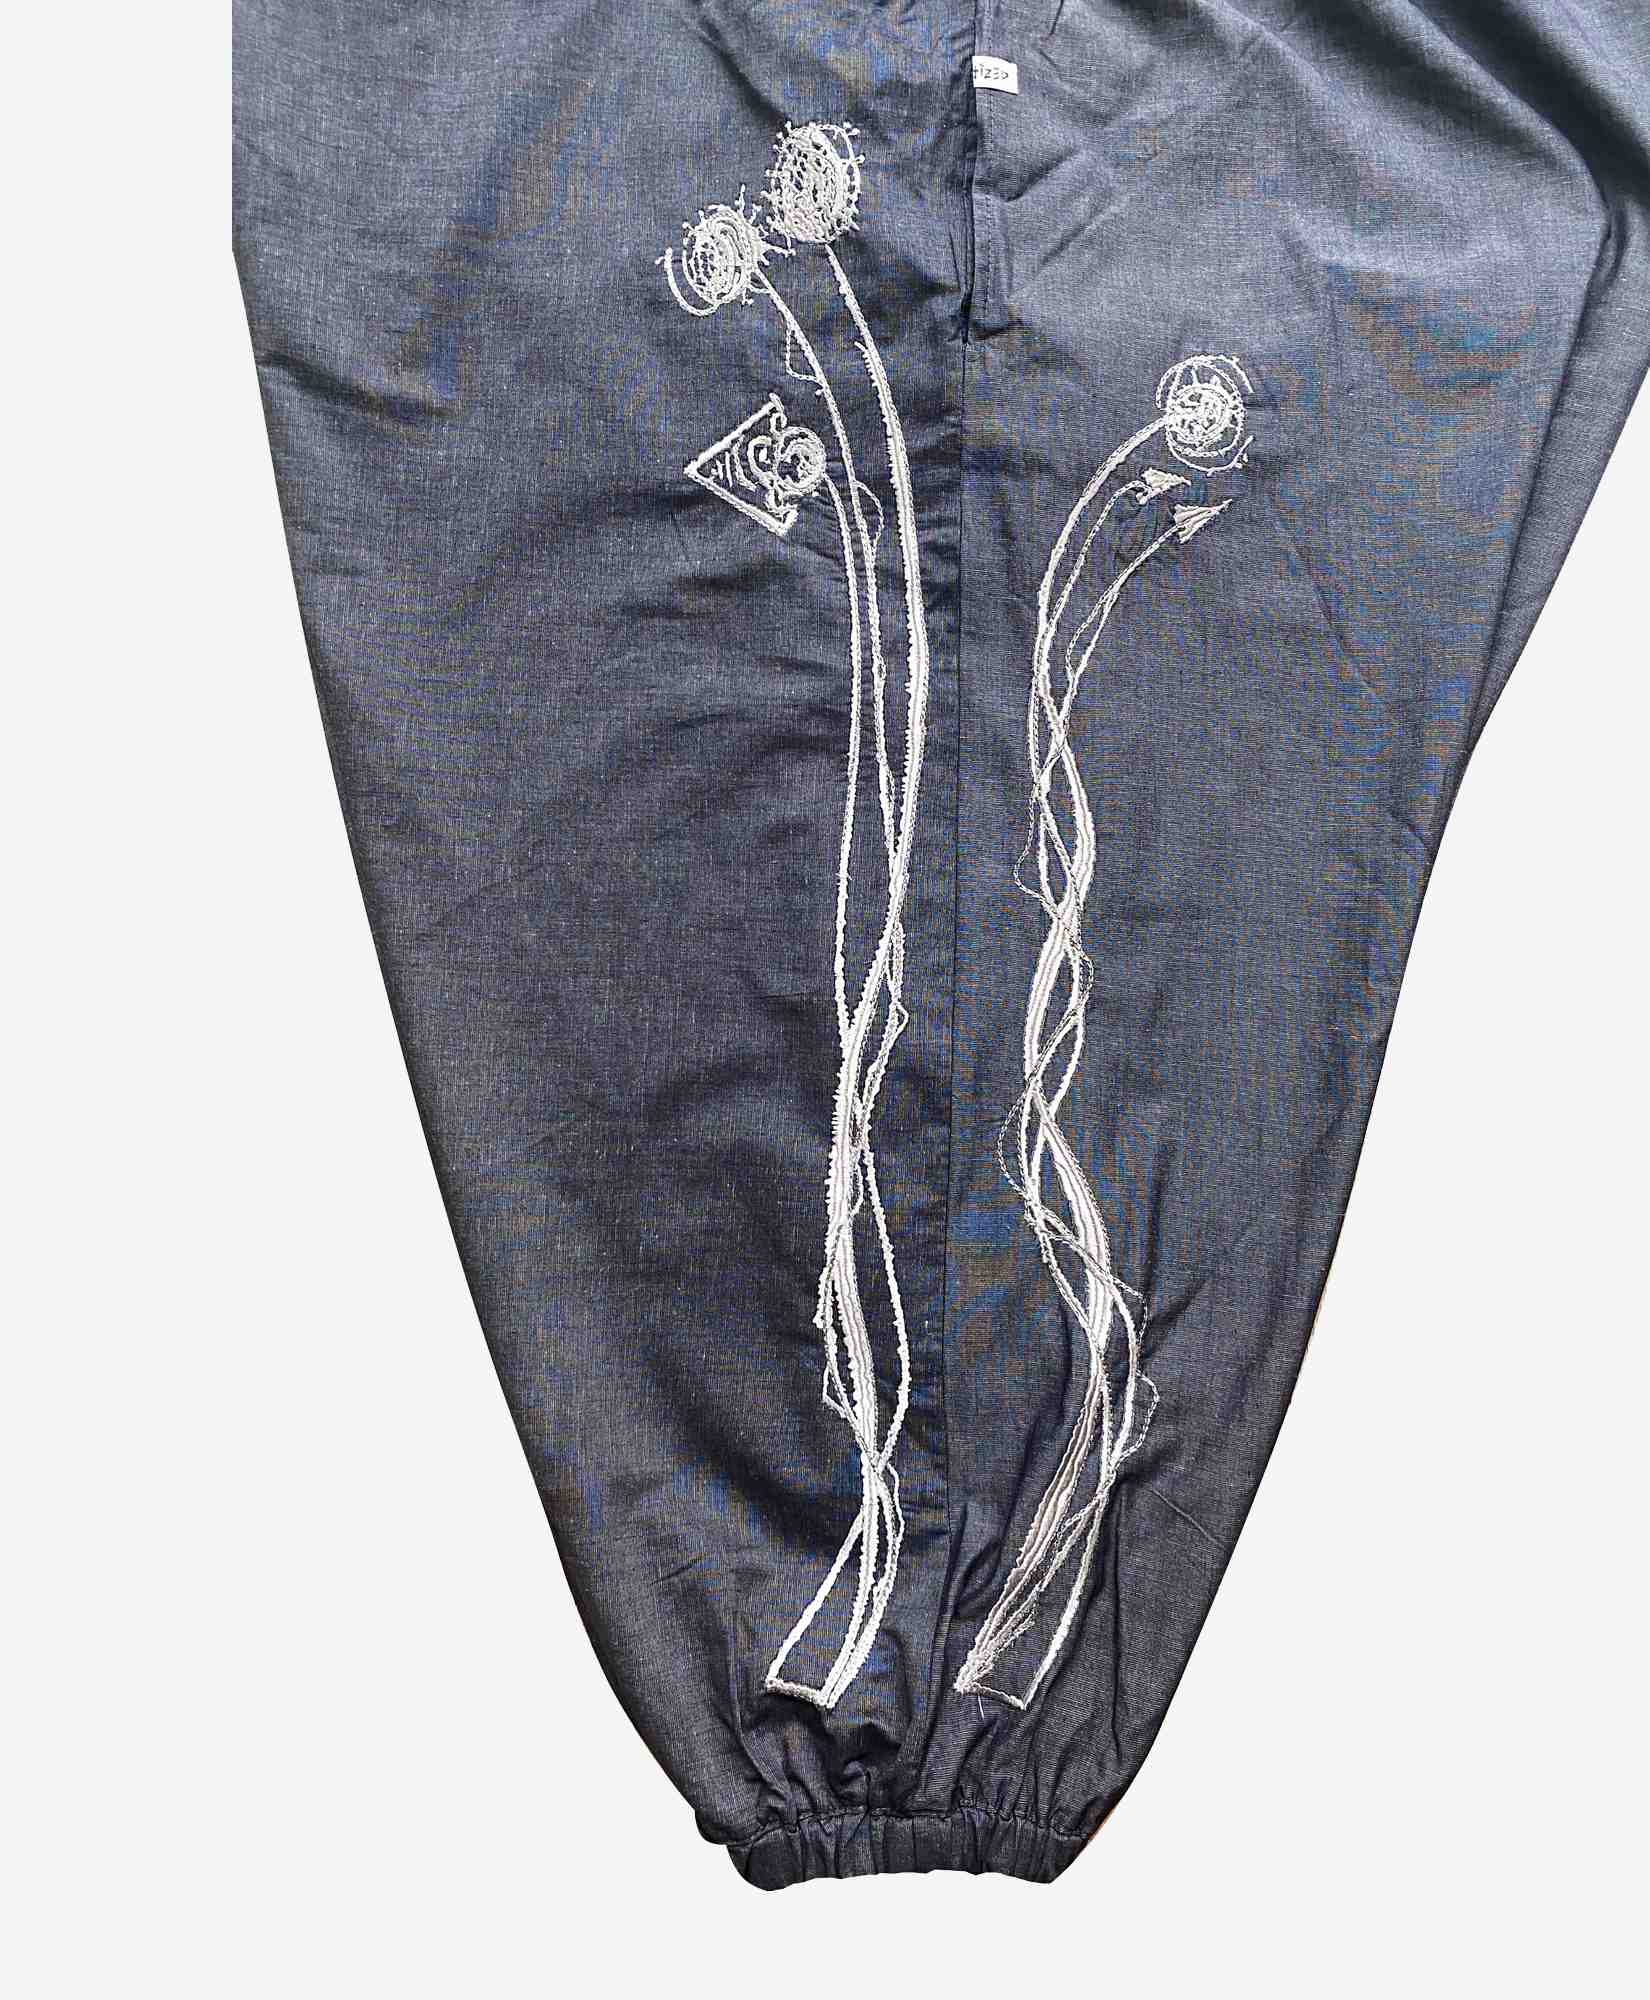 100% Cotton Embroidered Grey Harem Pants / Stitched  art on Sarouel